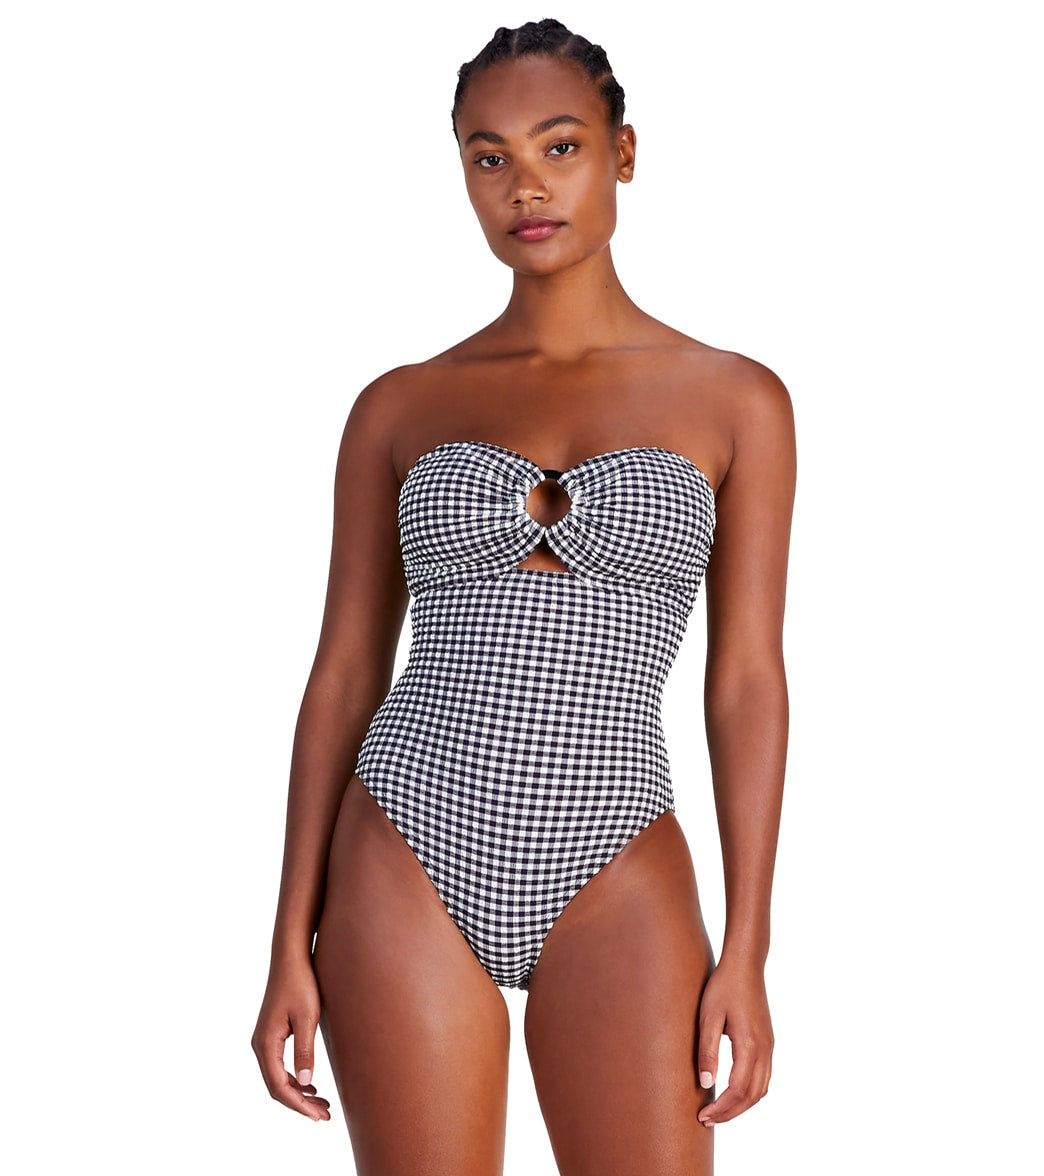 Kate Spade New York Womens Gingham Ring Bandeau One Piece Swimsuit